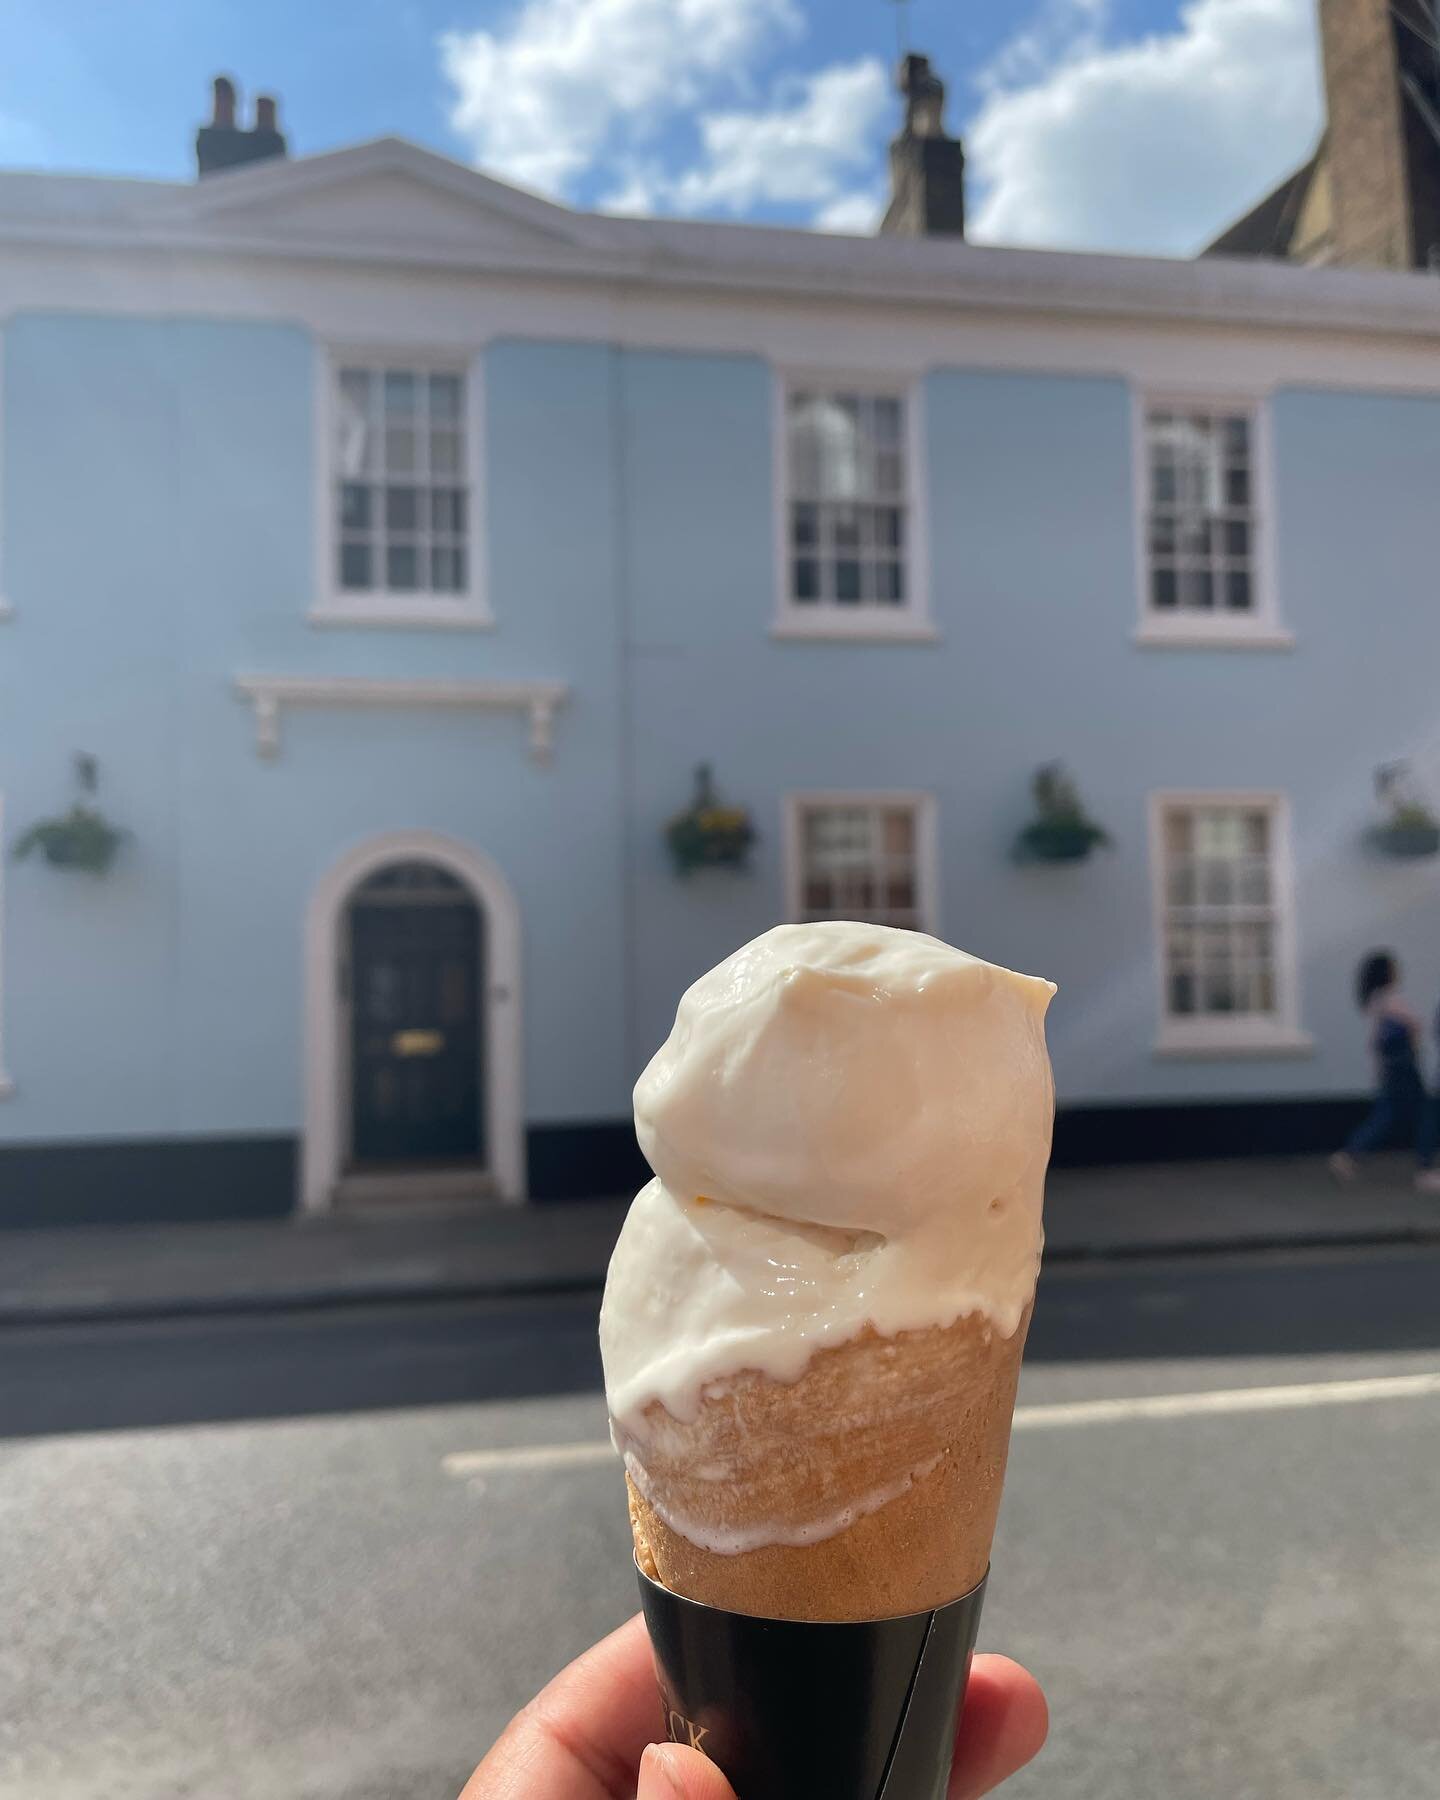 Happy Sunday

A Bright blue sky - can only mean ice cream time!

Delicious British ice cream
I bet you cannot guess the flavour ?
#icecream